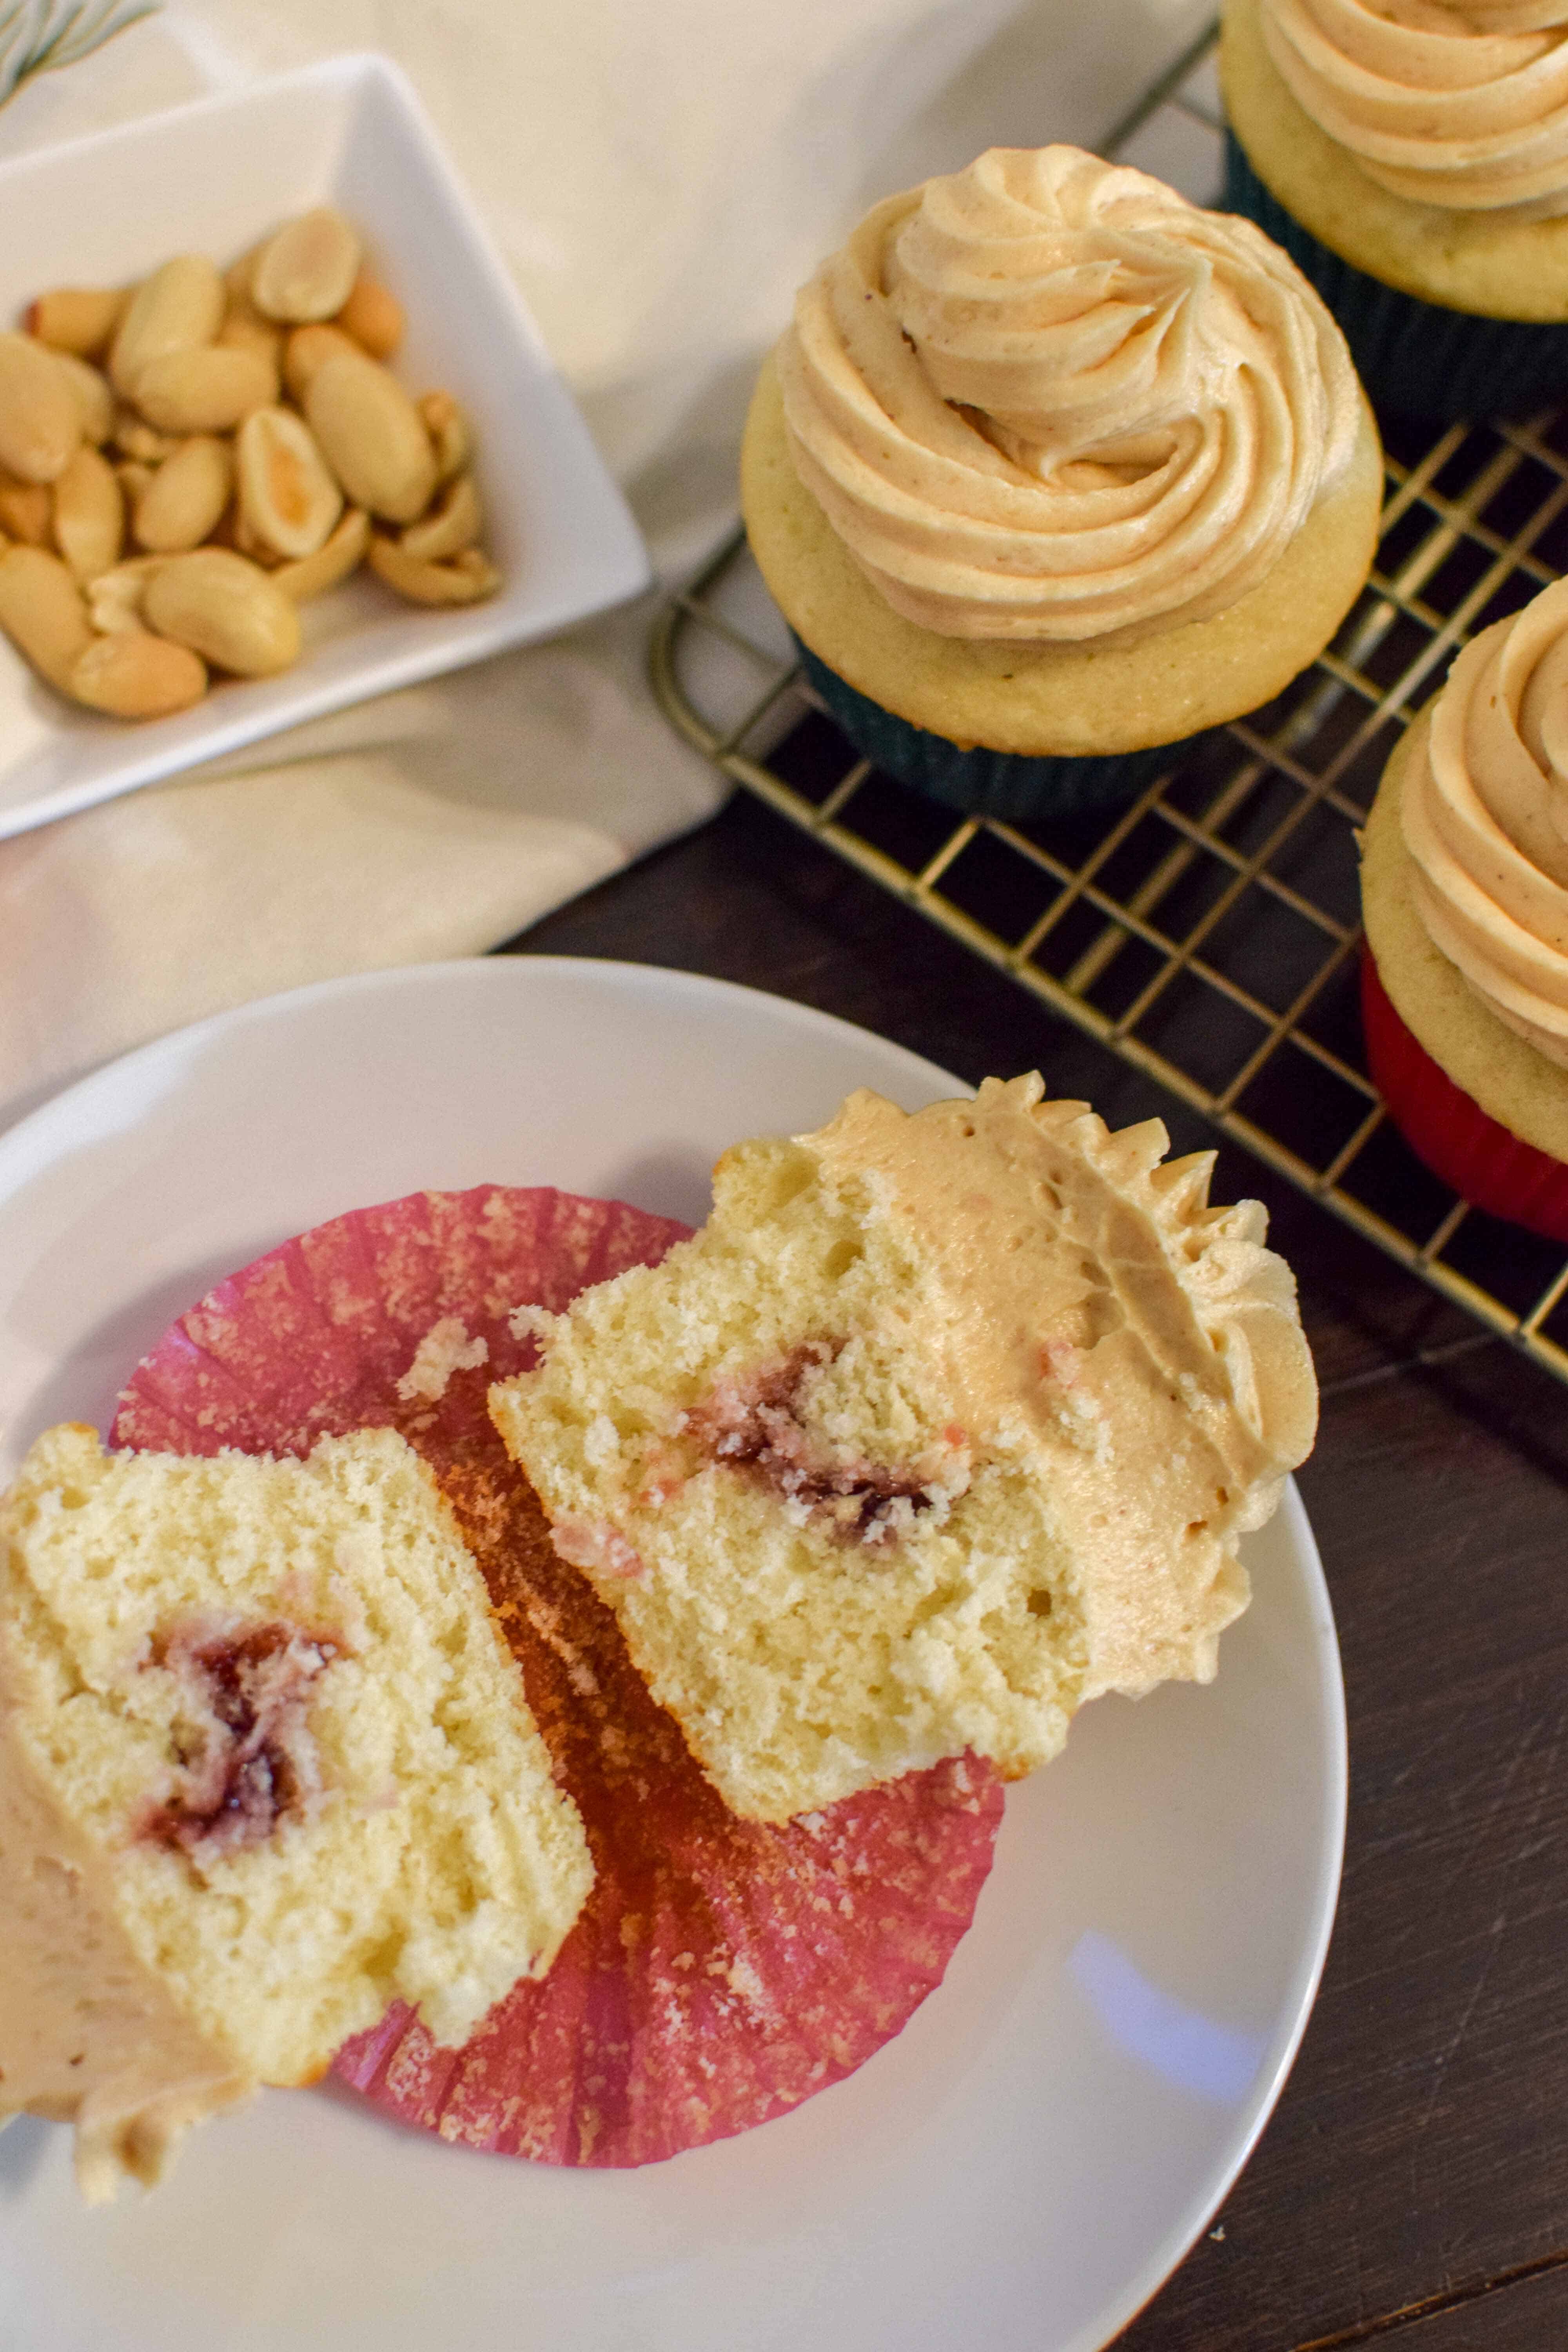 peanut butter and jelly cupcakes